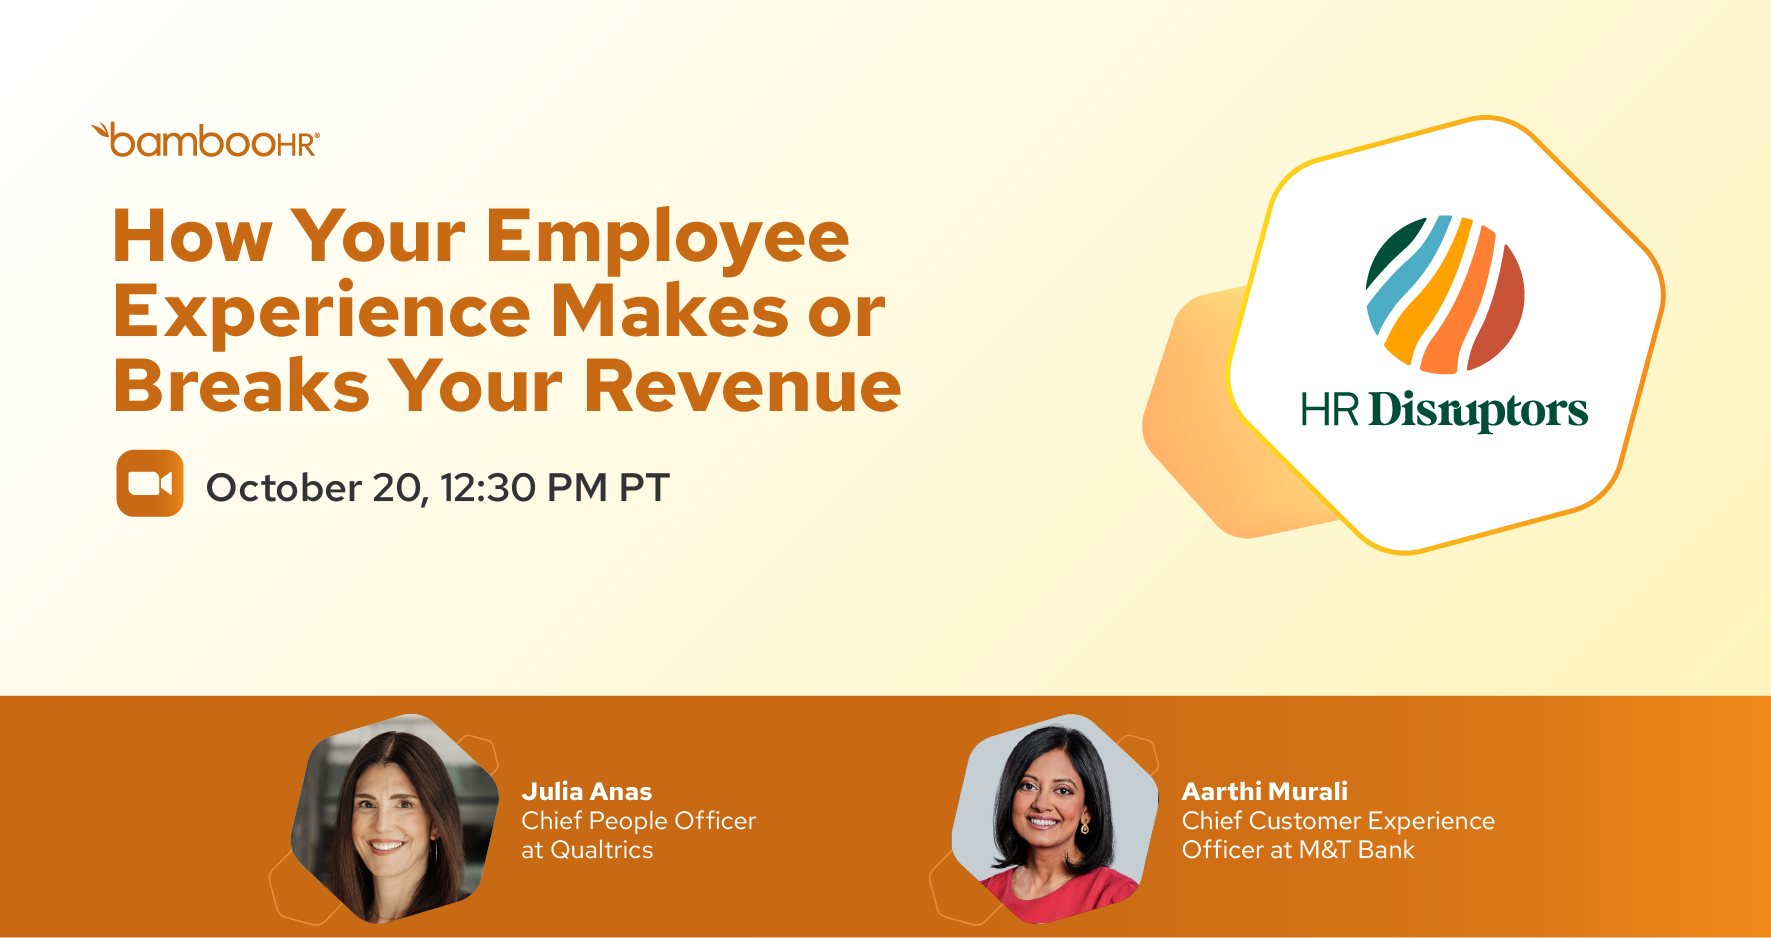  How Your Employee Experience Makes or Breaks Your Revenue